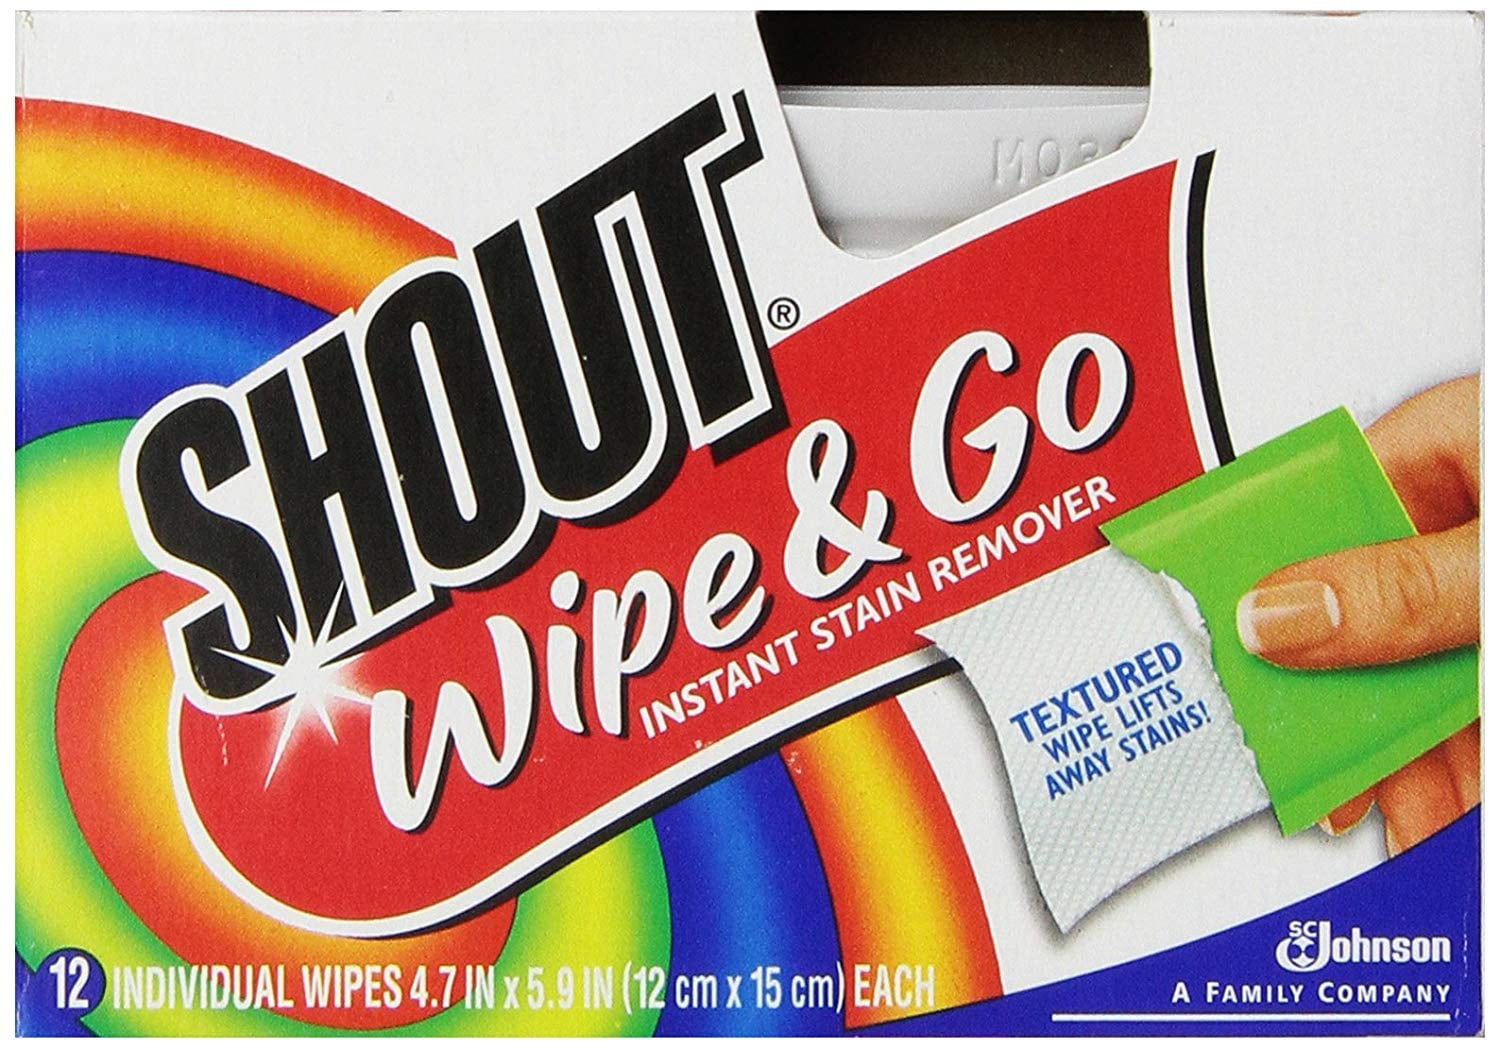 3 boxes of Shout Wipe & Go Instant Stain Remover Shout Wipes 36 wipes 